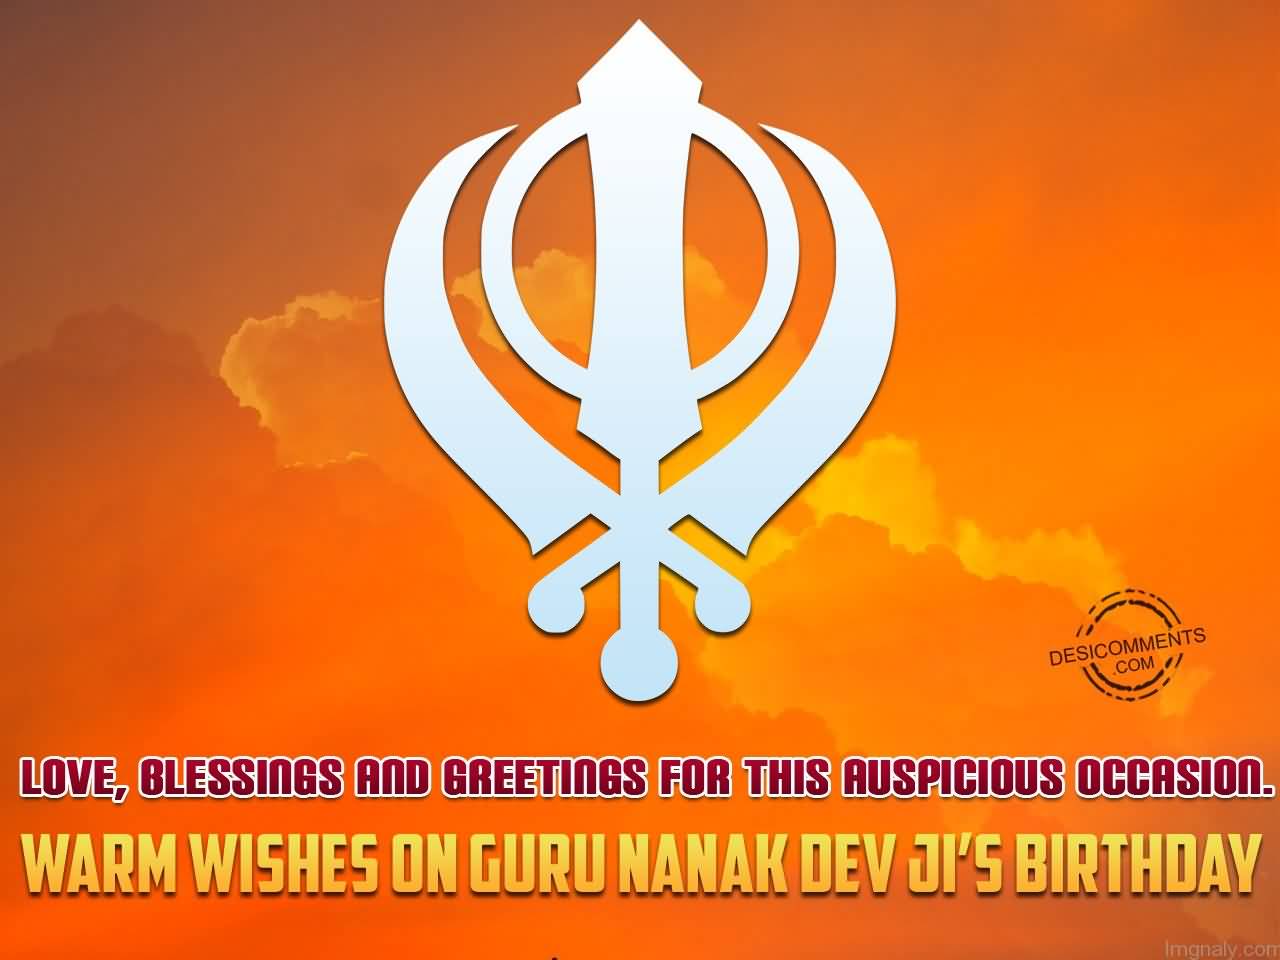 Love, Blessings And Greetings For This Auspicious Occasion Warm Wishes On Guru Nanak Dev Ji's Birthday